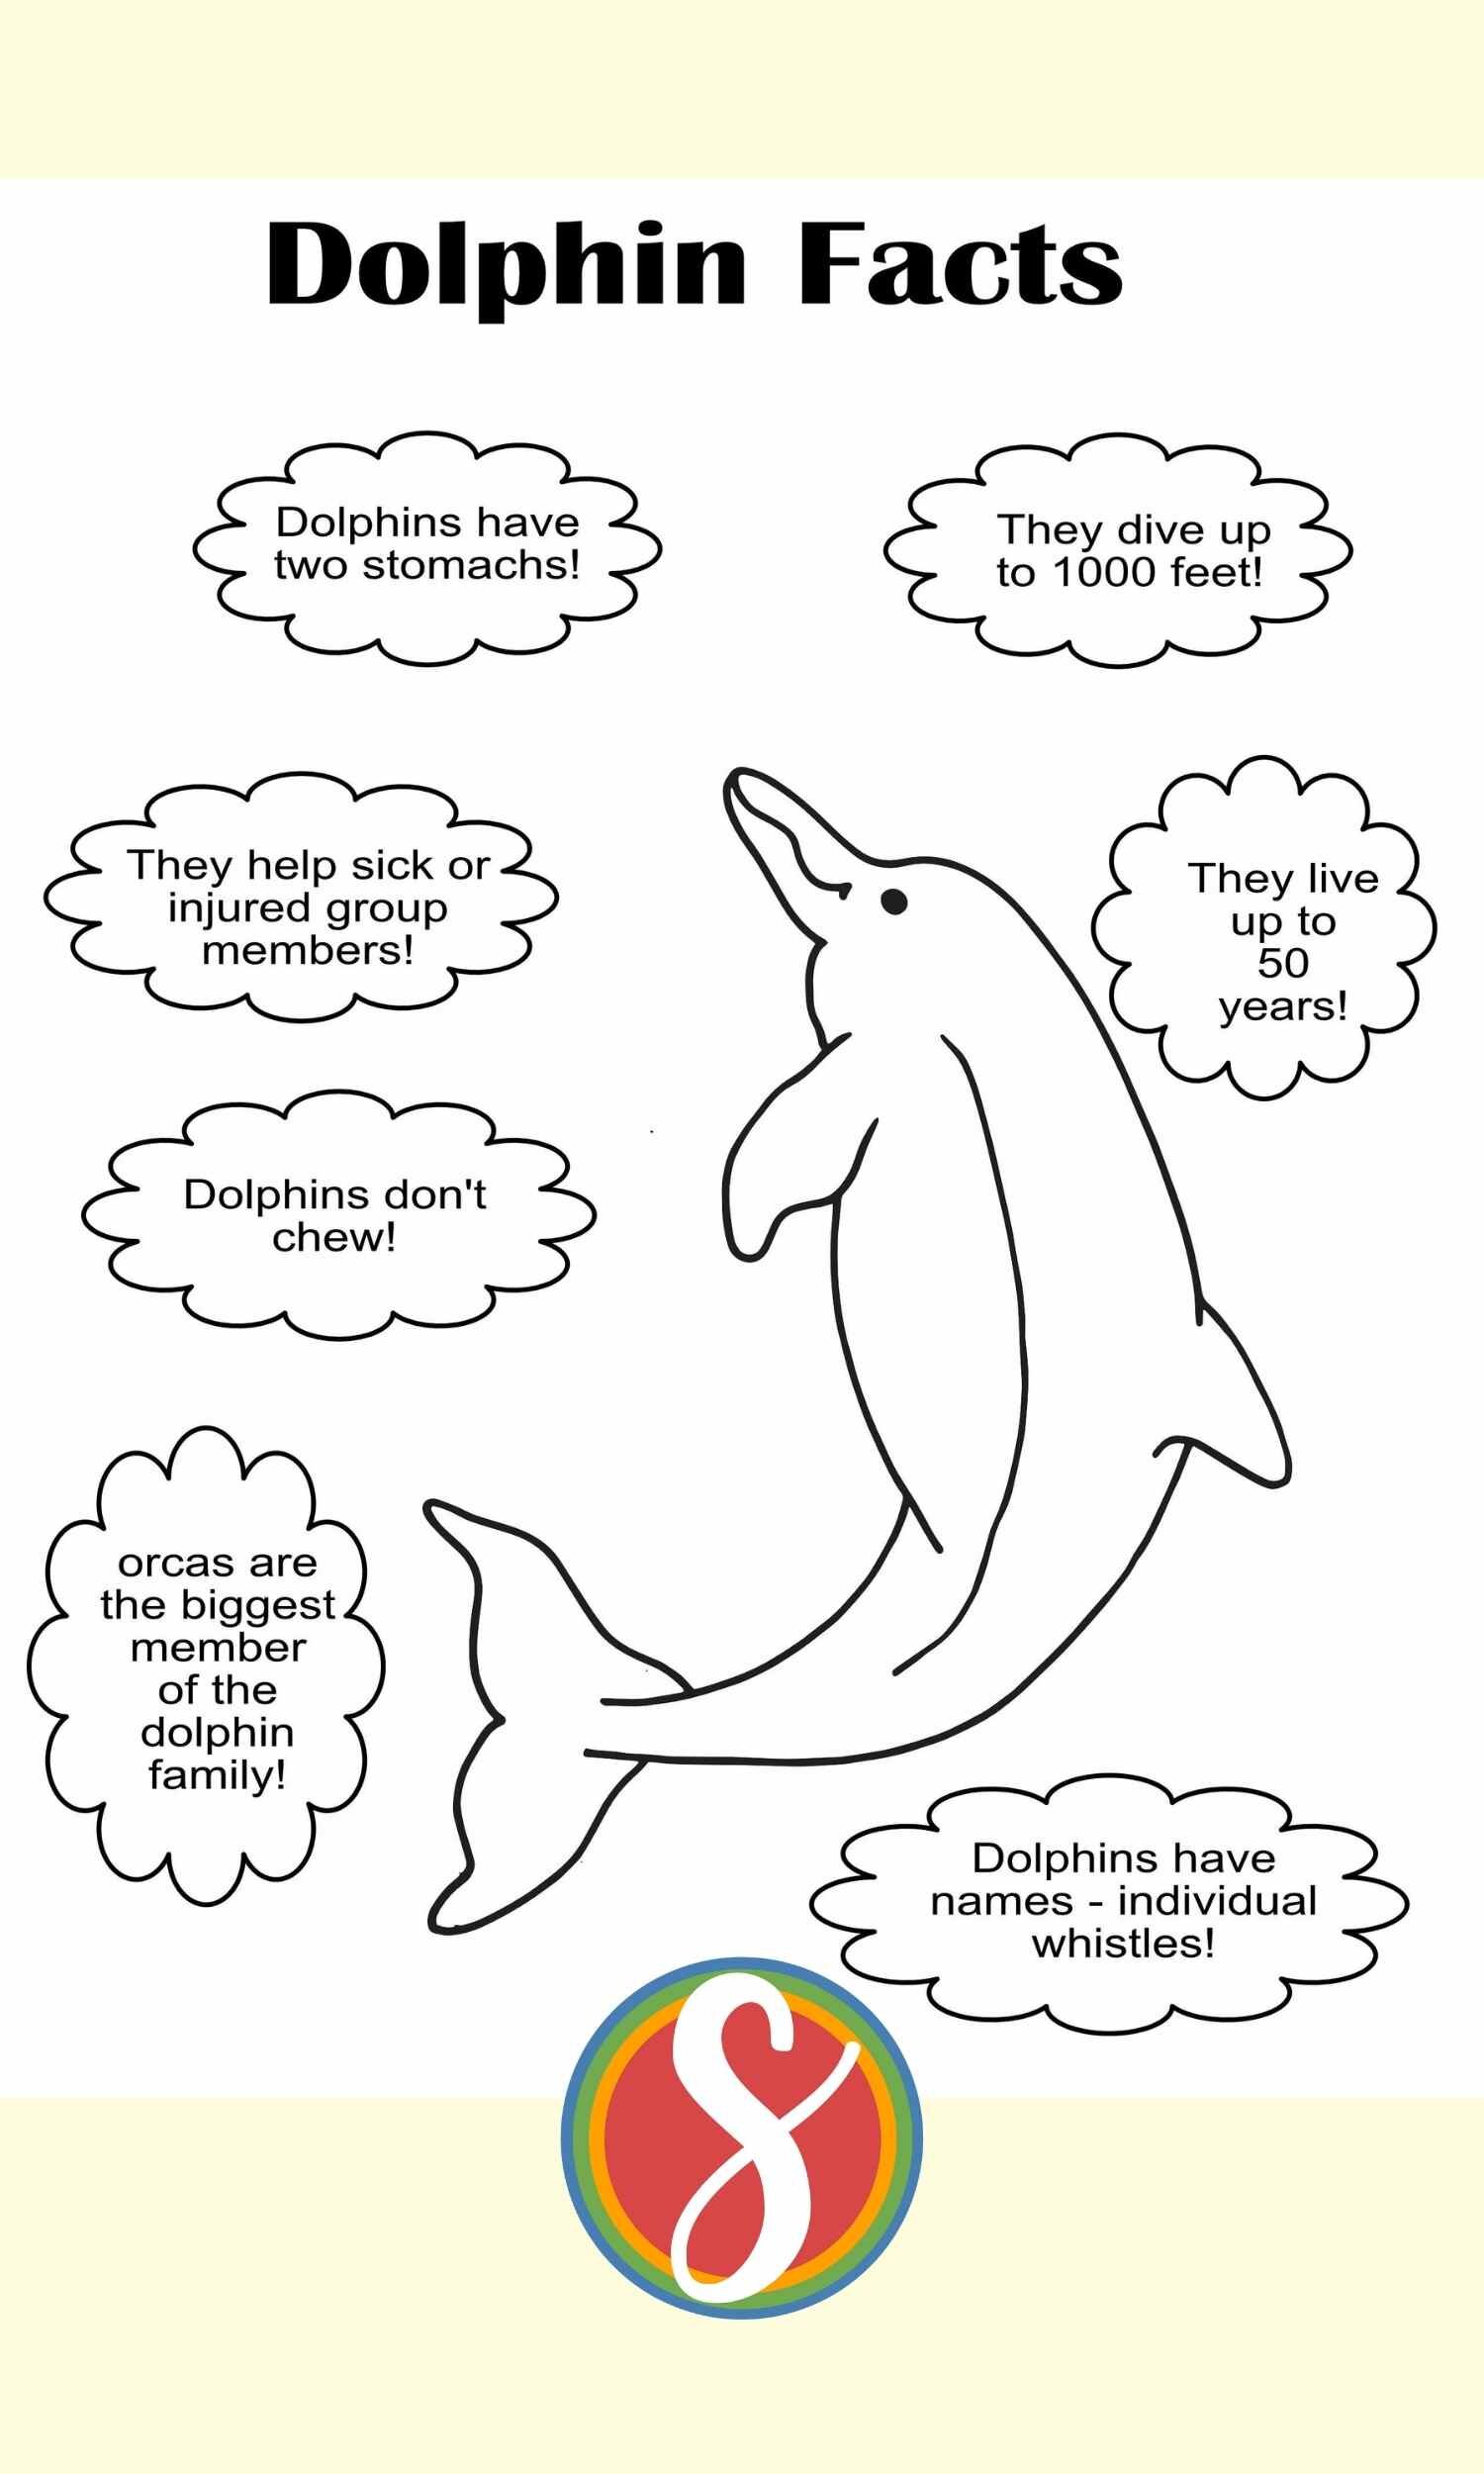 Free dolphin facts coloring page from Stevie Doodles - 11 free dolphin coloring pages!